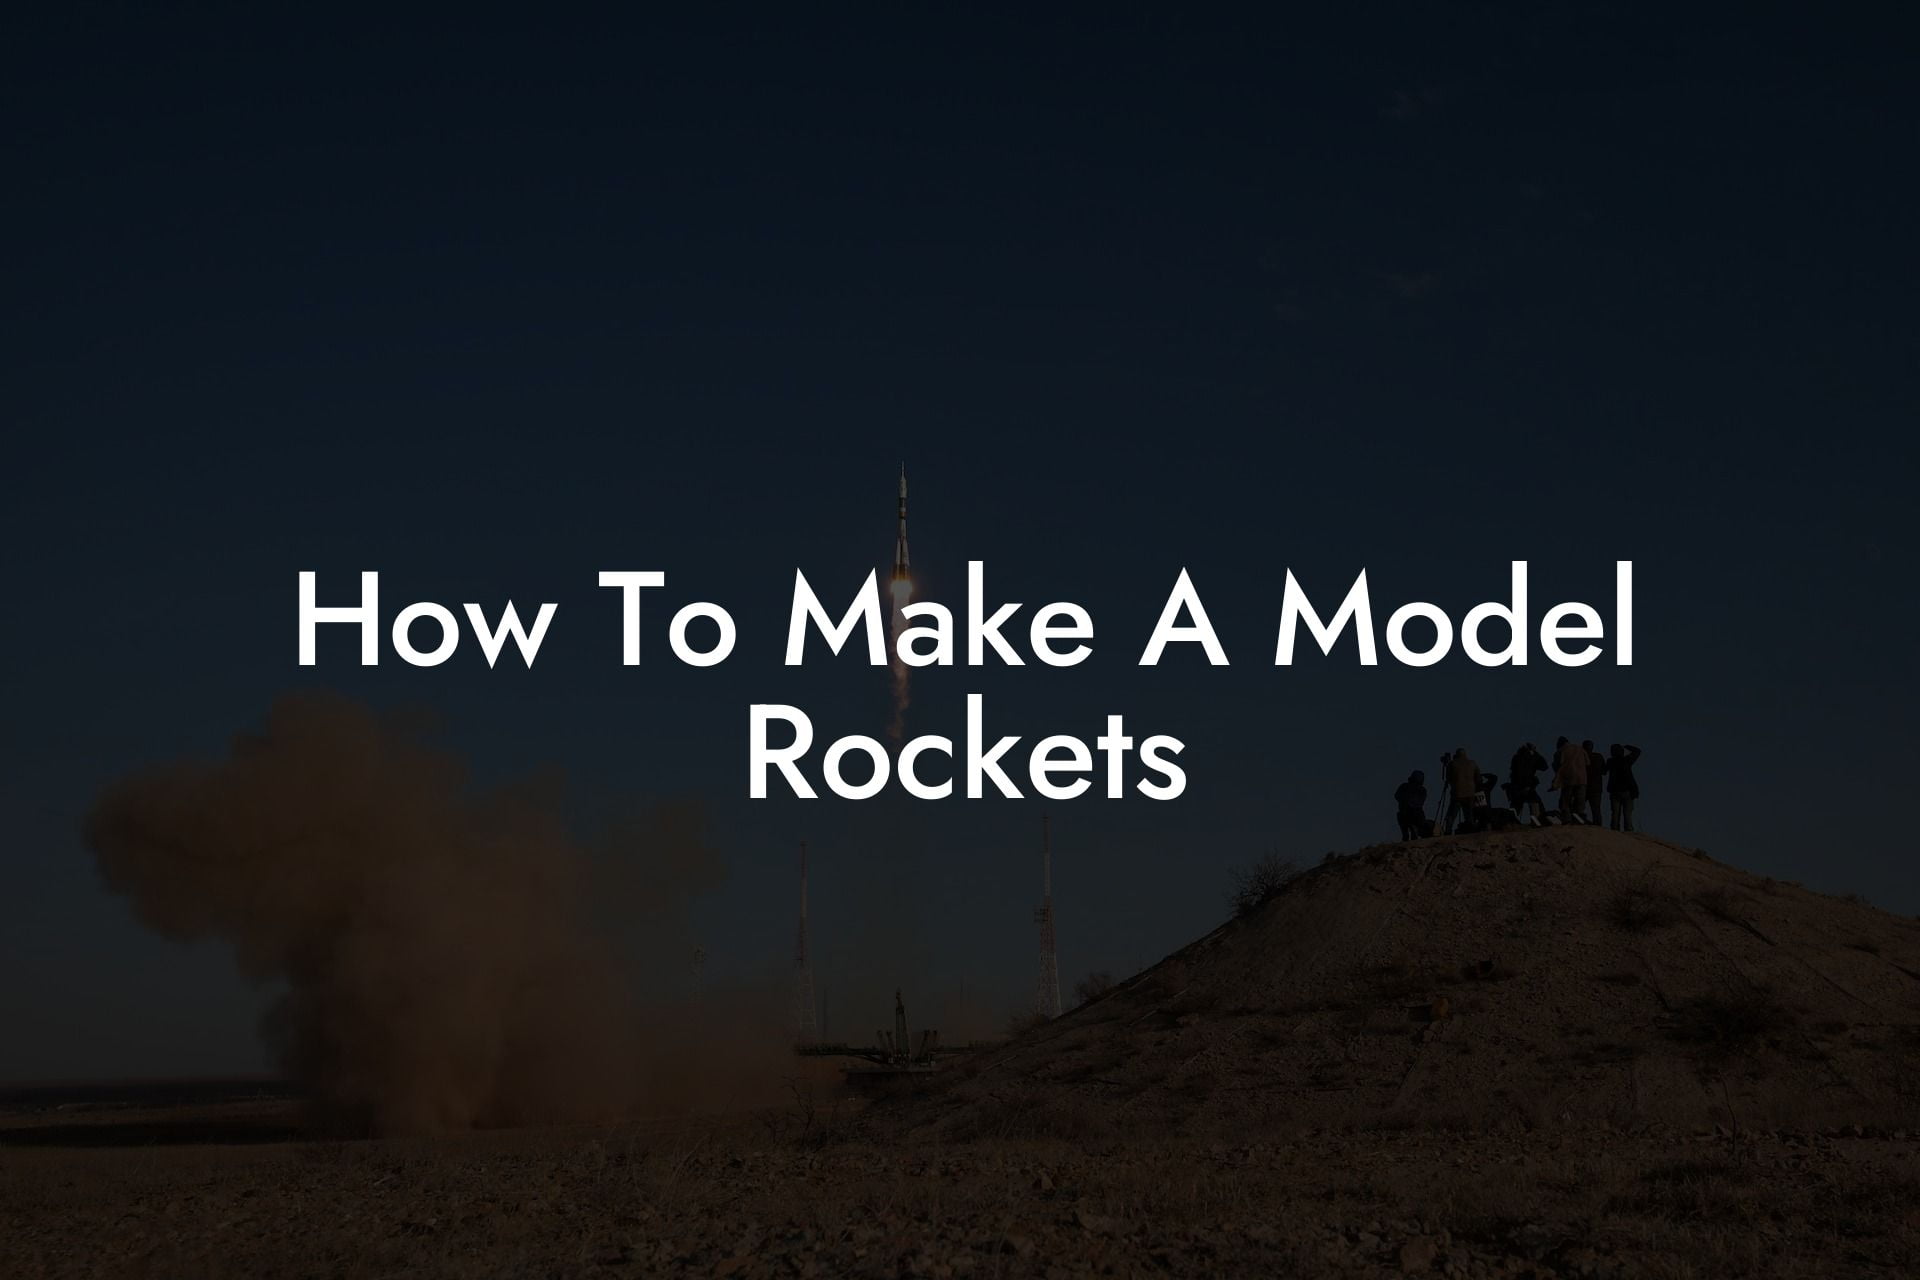 How To Make A Model Rockets